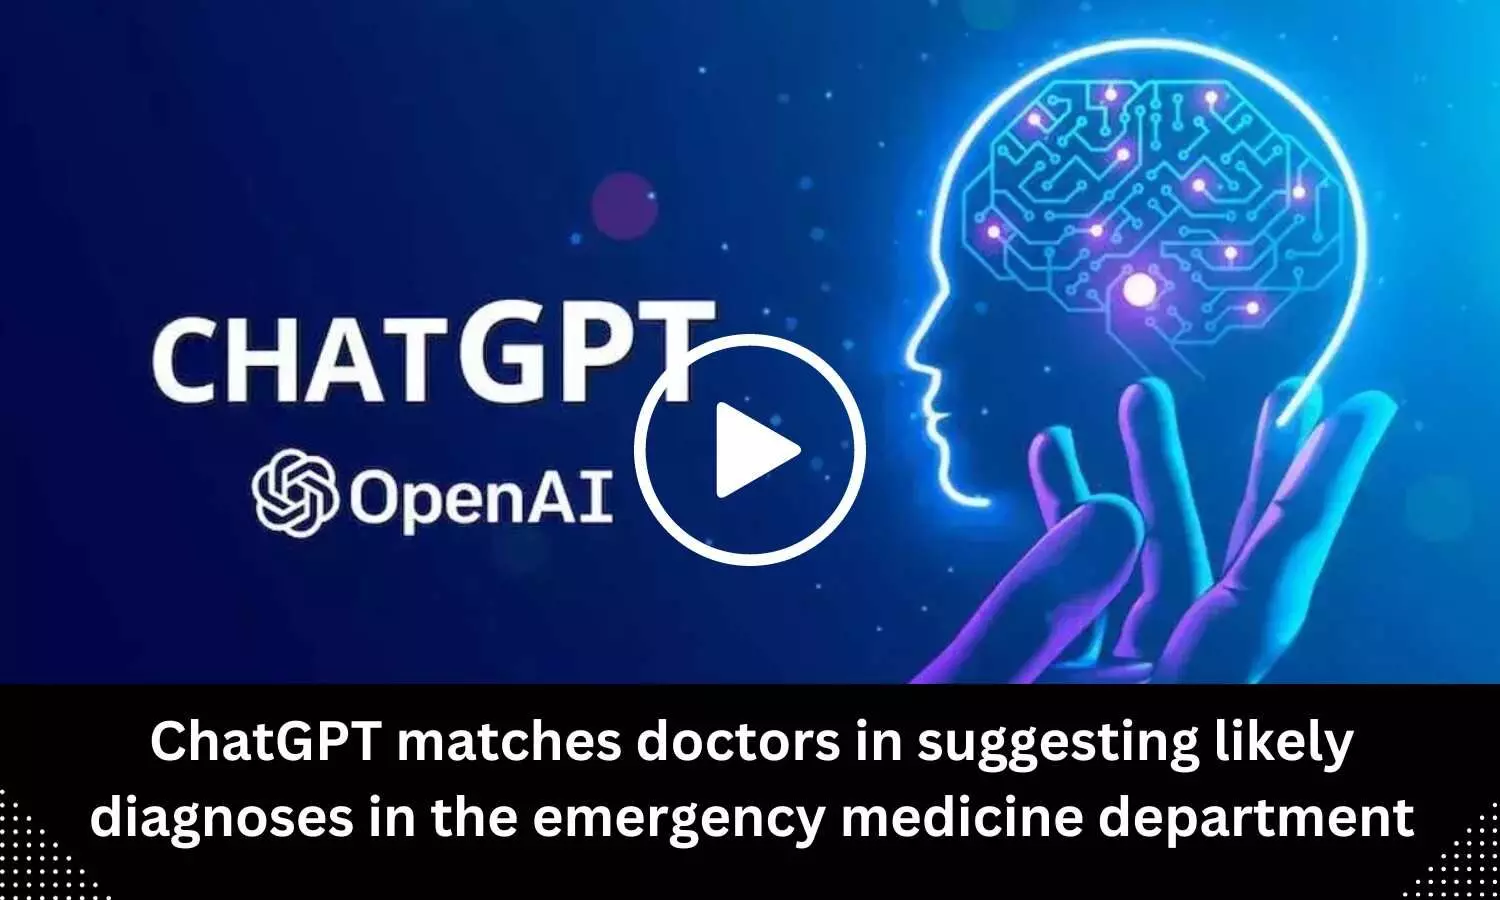 ChatGPT matches doctors in suggesting likely diagnoses in the emergency medicine department